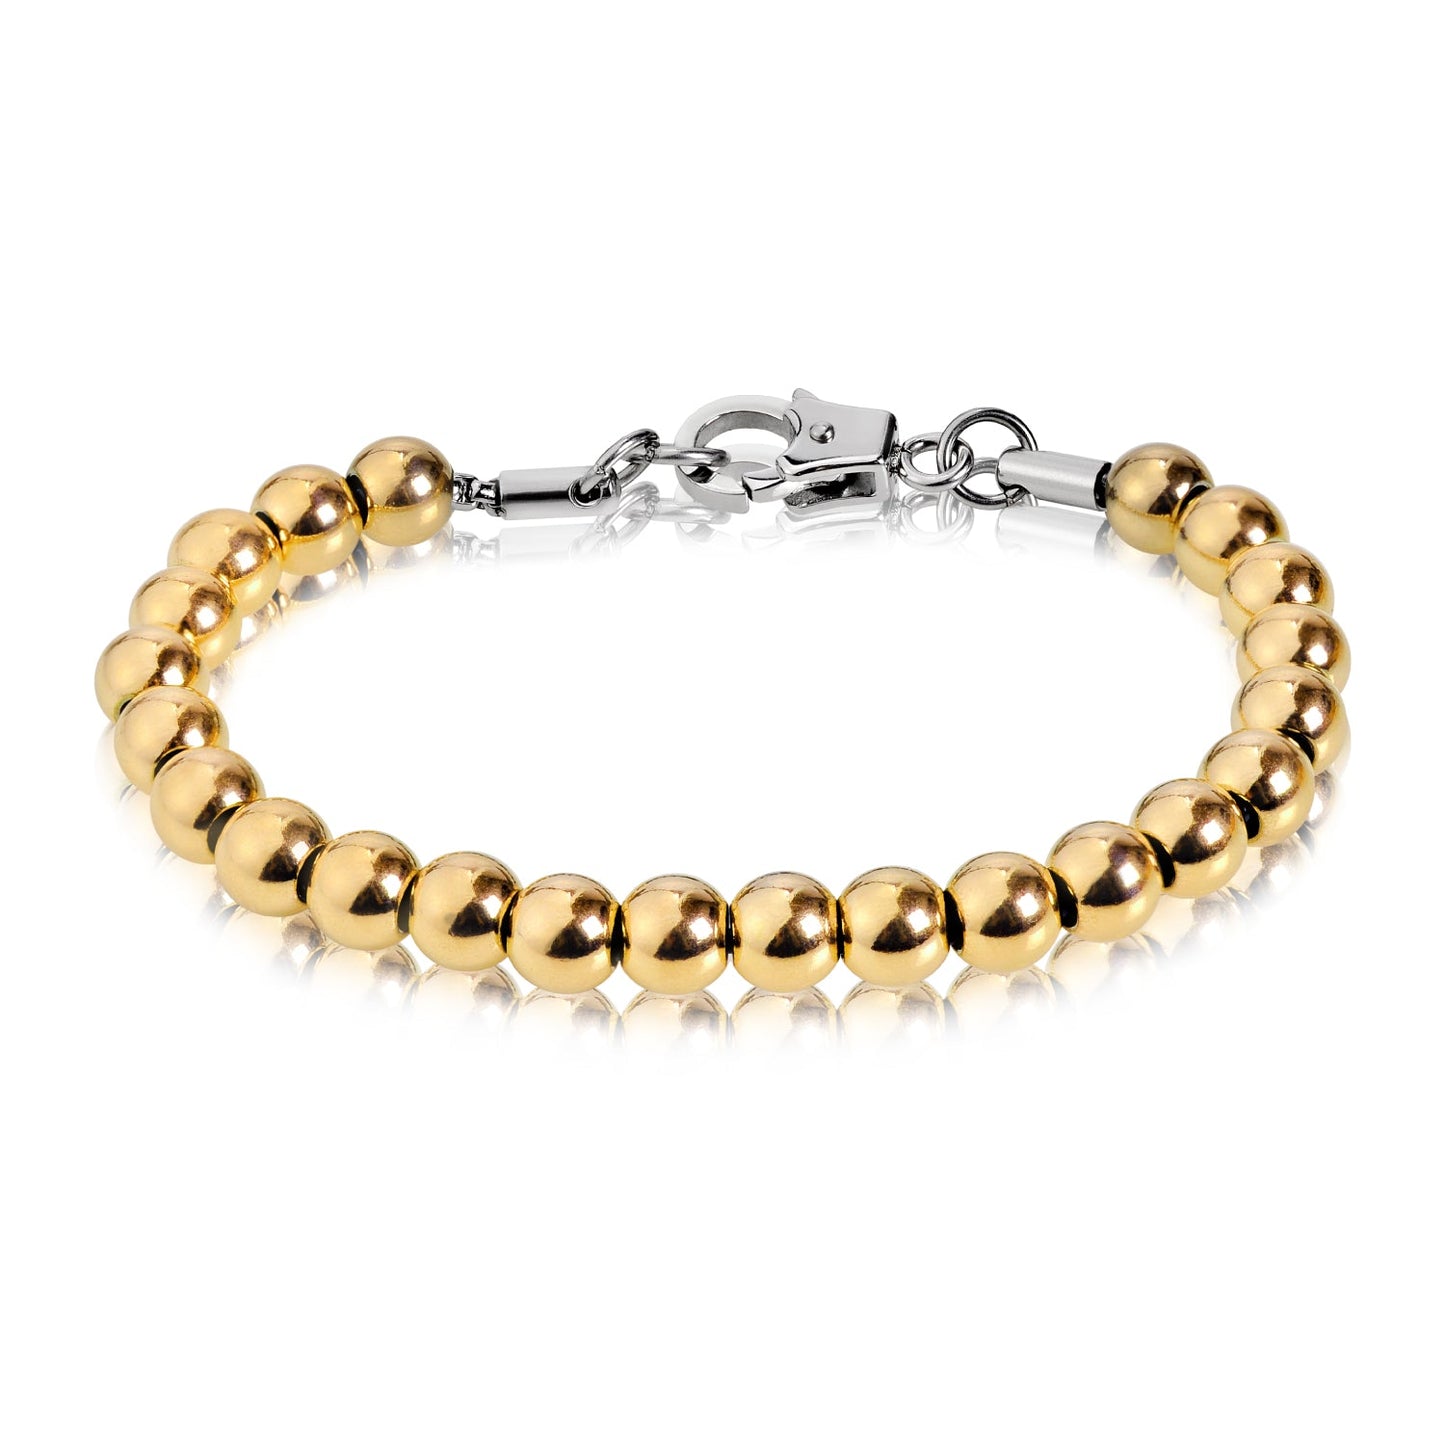 6mm Gold PVD Plated Bead Tribal Bracelet